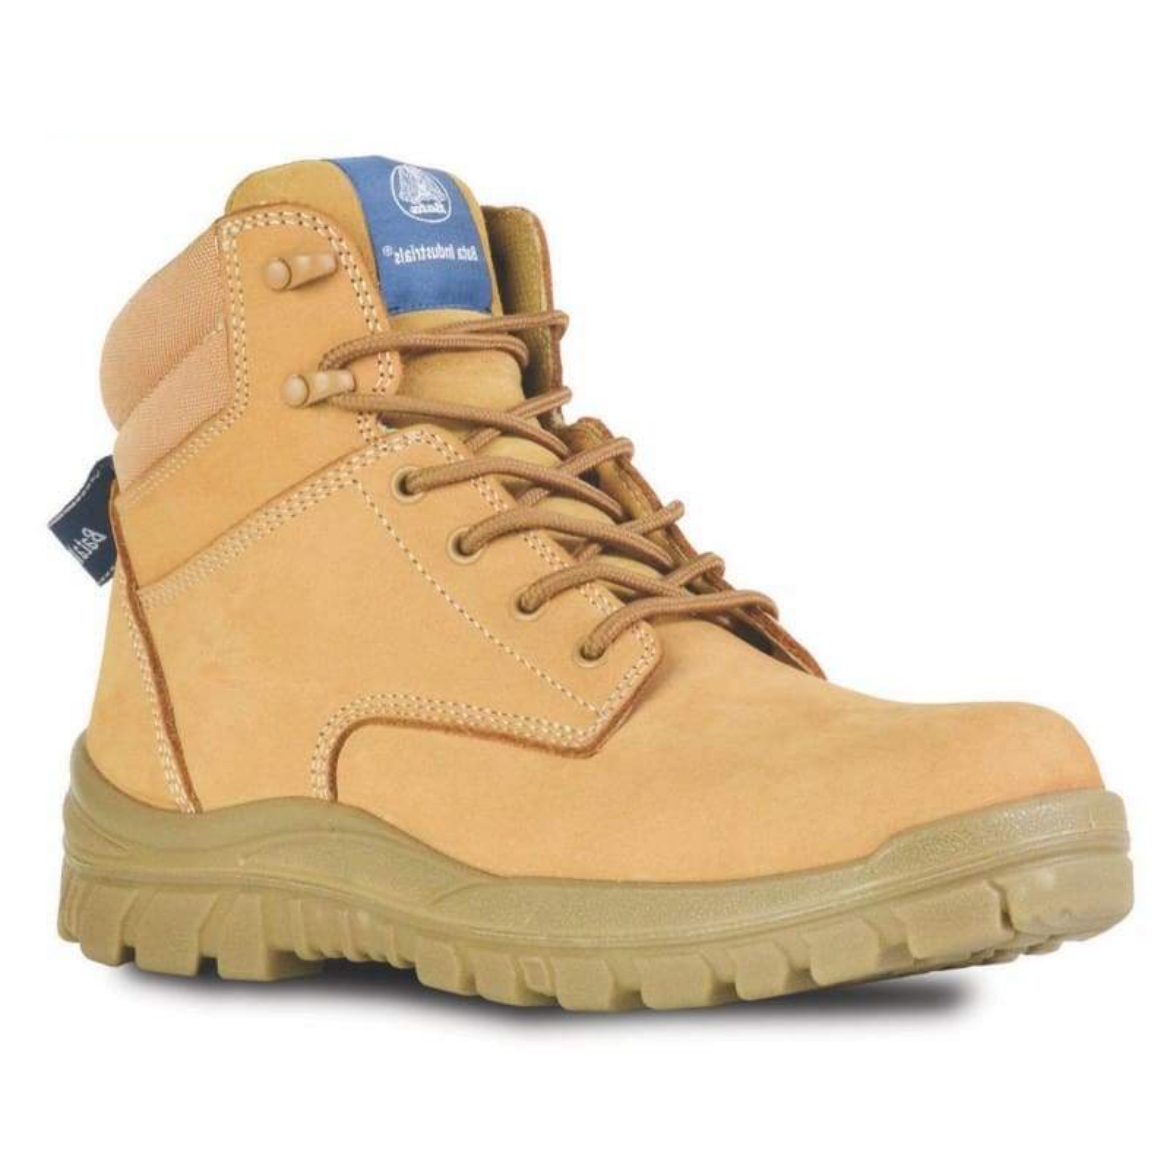 Picture of Bata Industrials, Titan, Safety Boot, Nubuck, Lace-Up